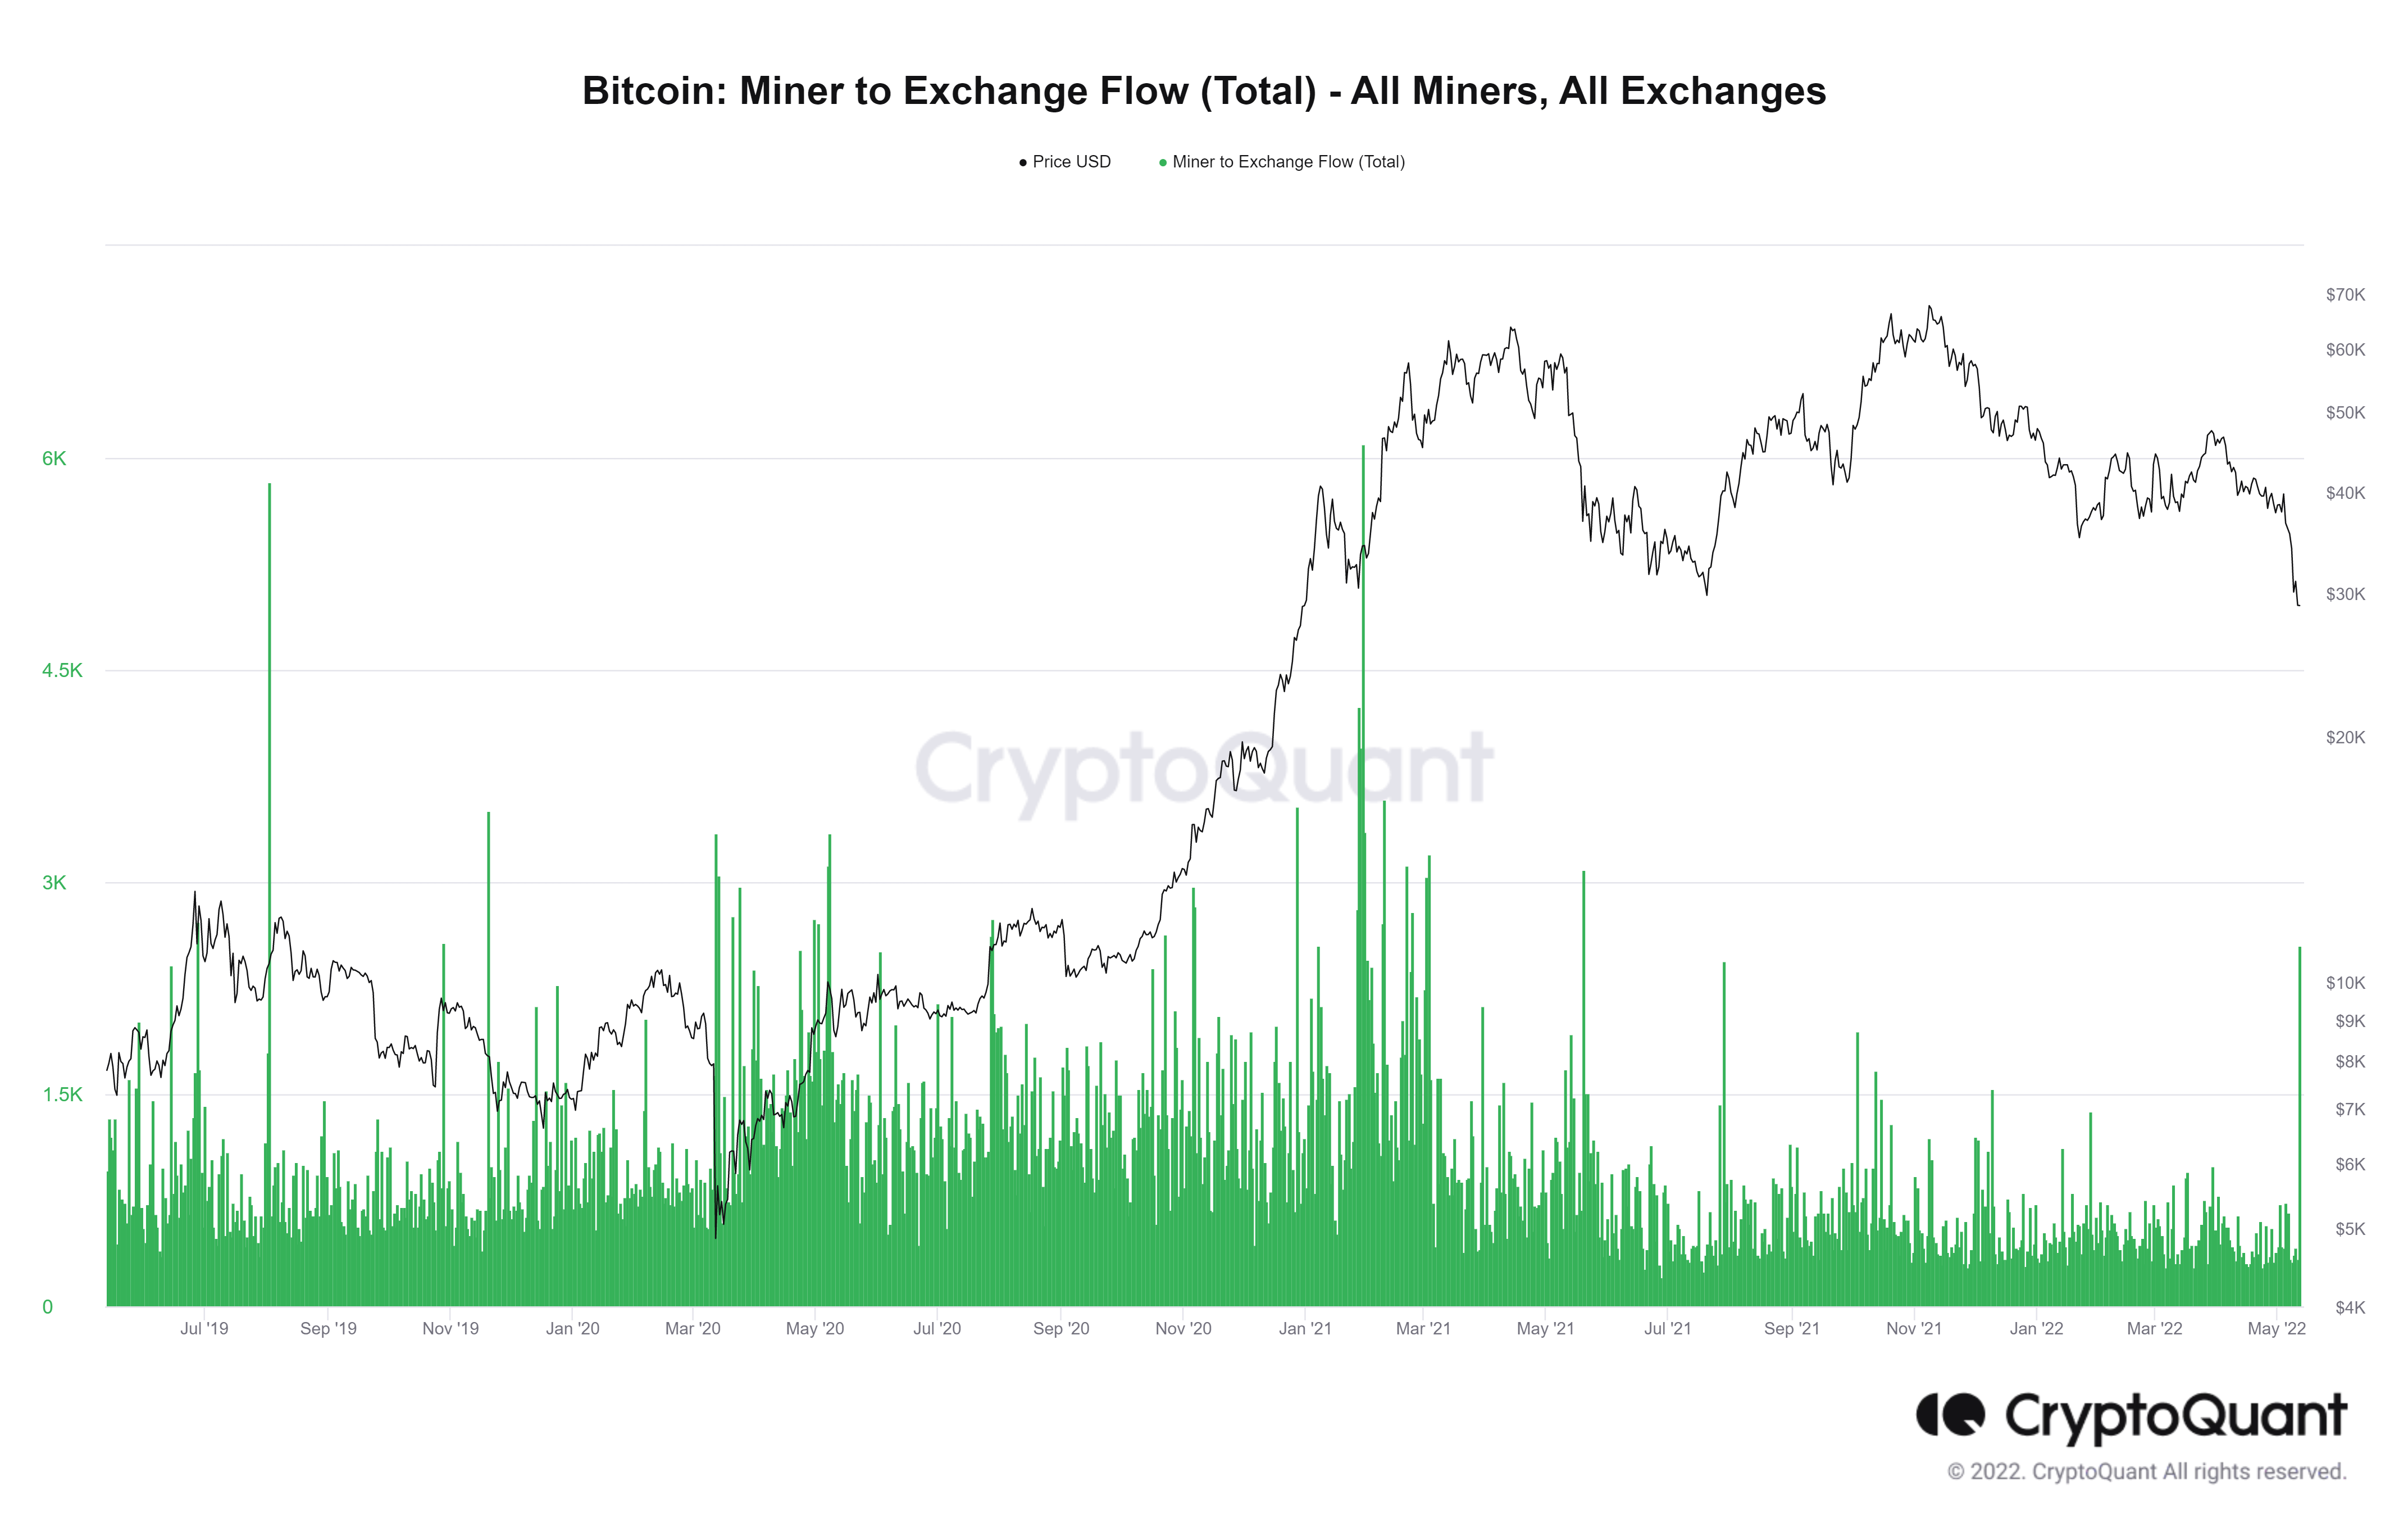 Bitcoin: Miners to Exchange Flow (Total). Nguồn: CryptoQuant.